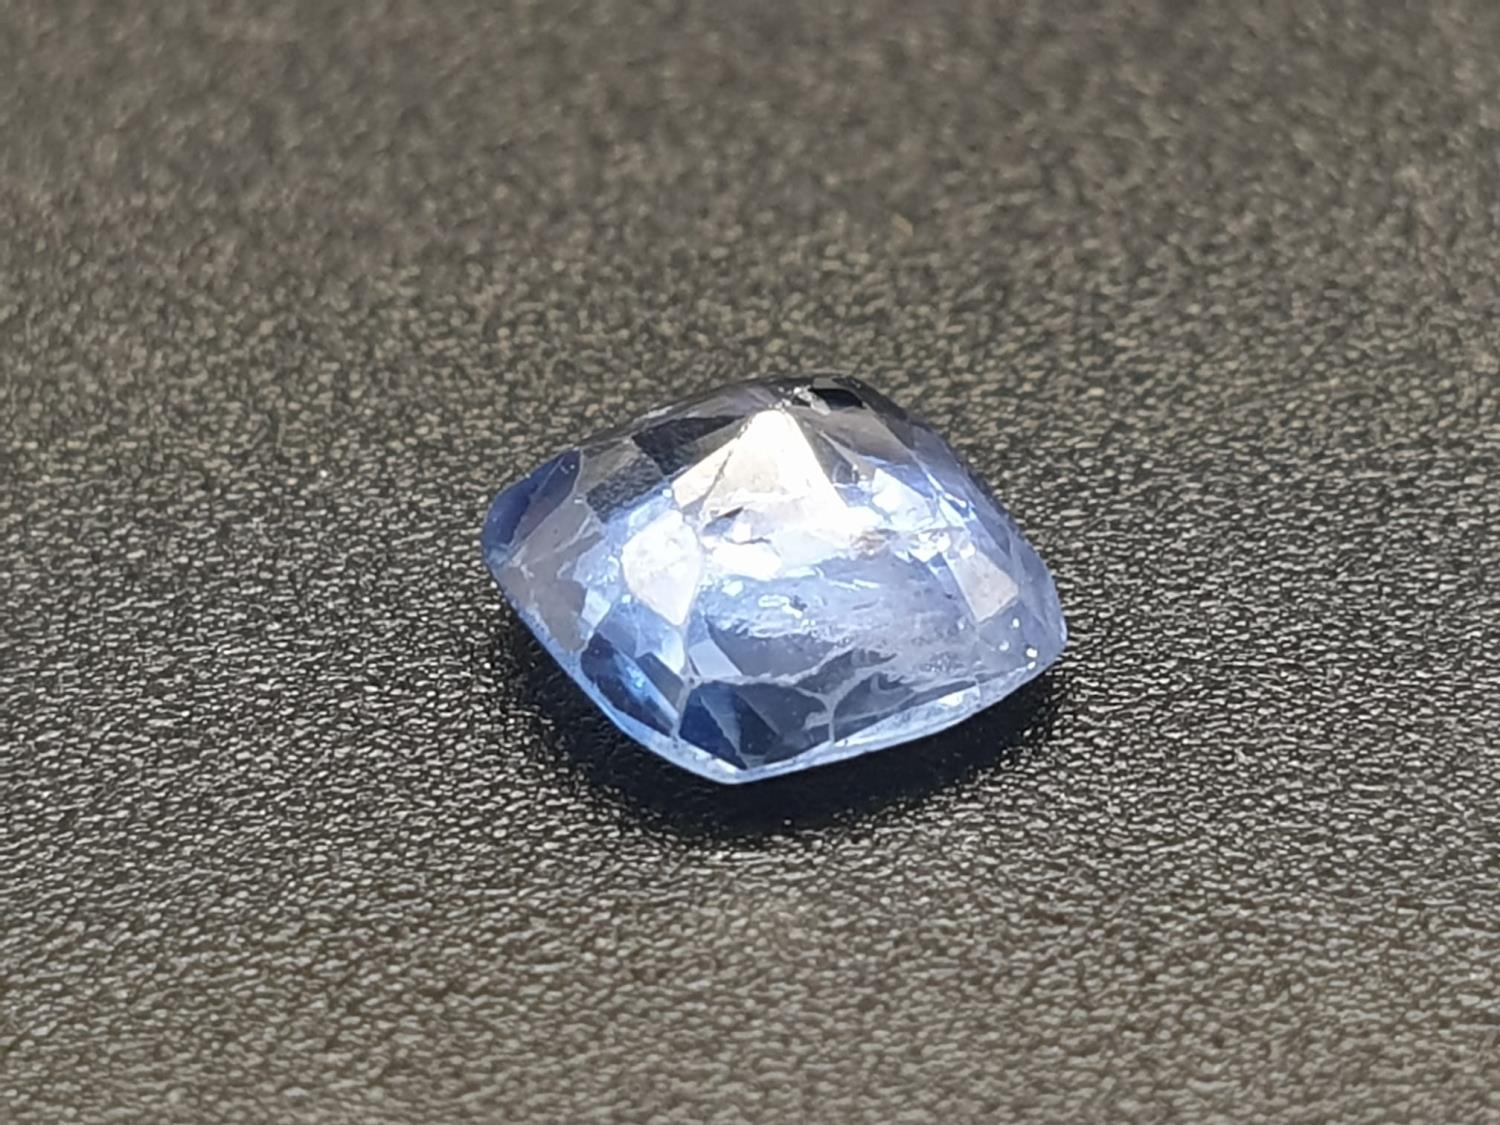 1.25ct cushion cut blue sapphire gemstone comes with original AnchorCert report and Safeguard - Image 3 of 5